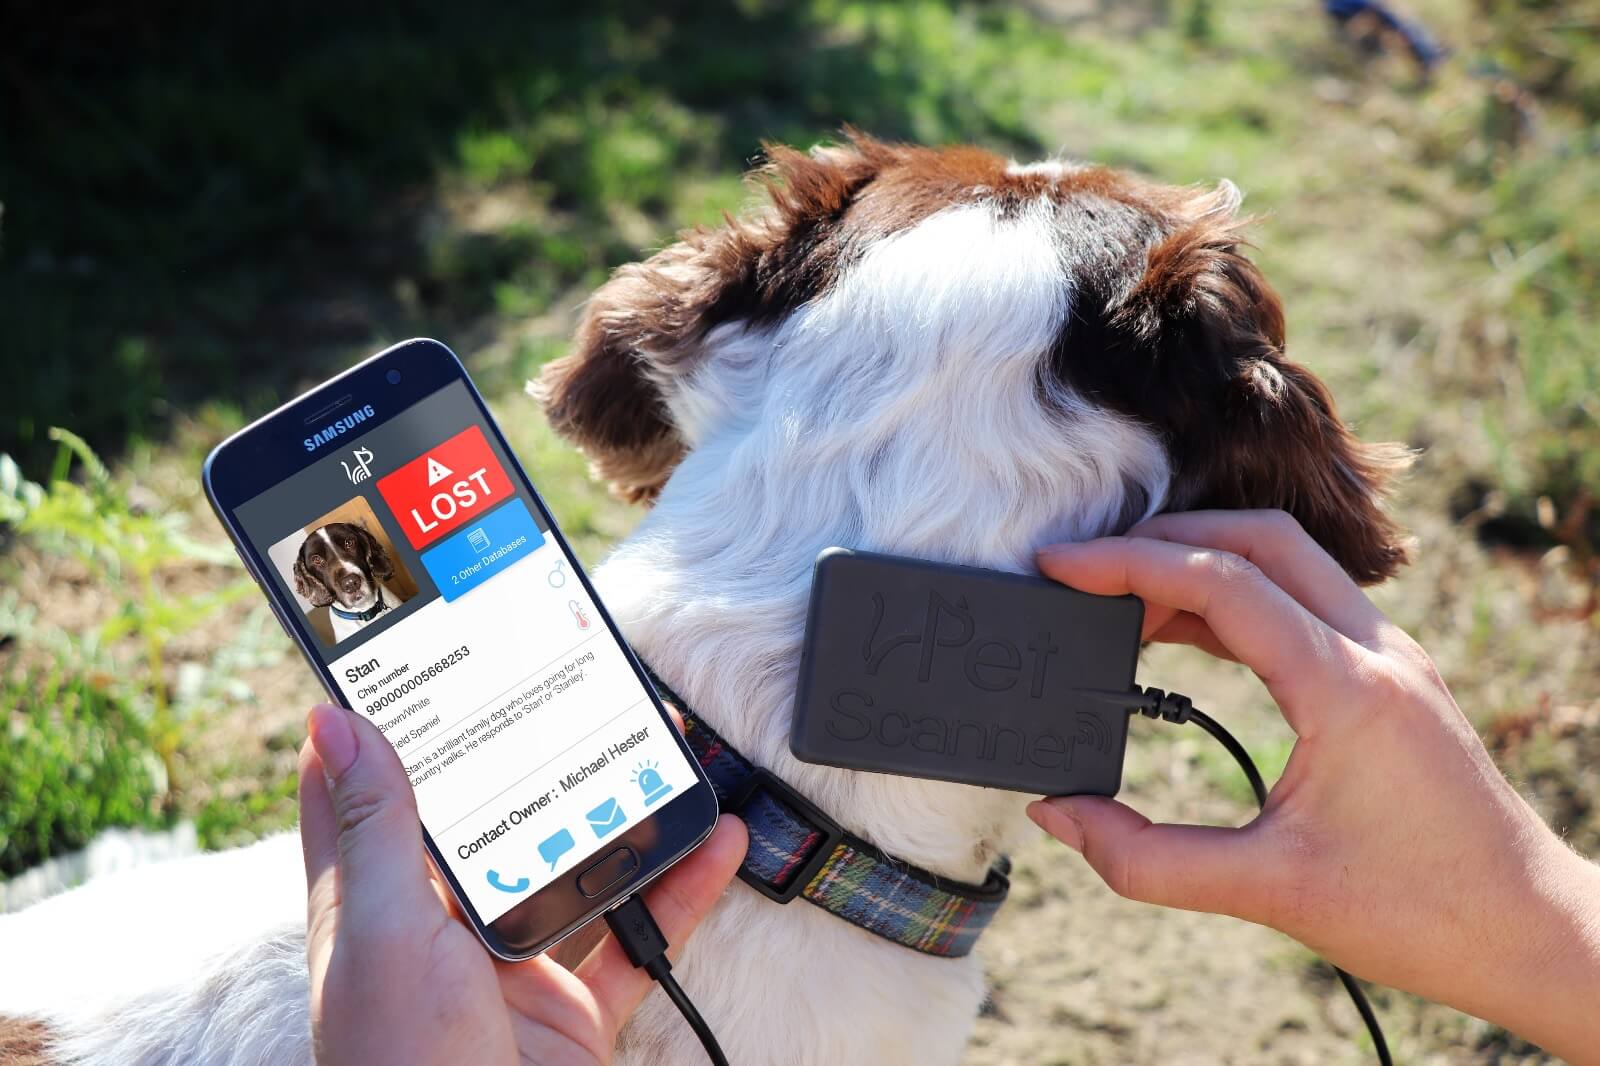 Image of PetScanner reader and app in use on dog